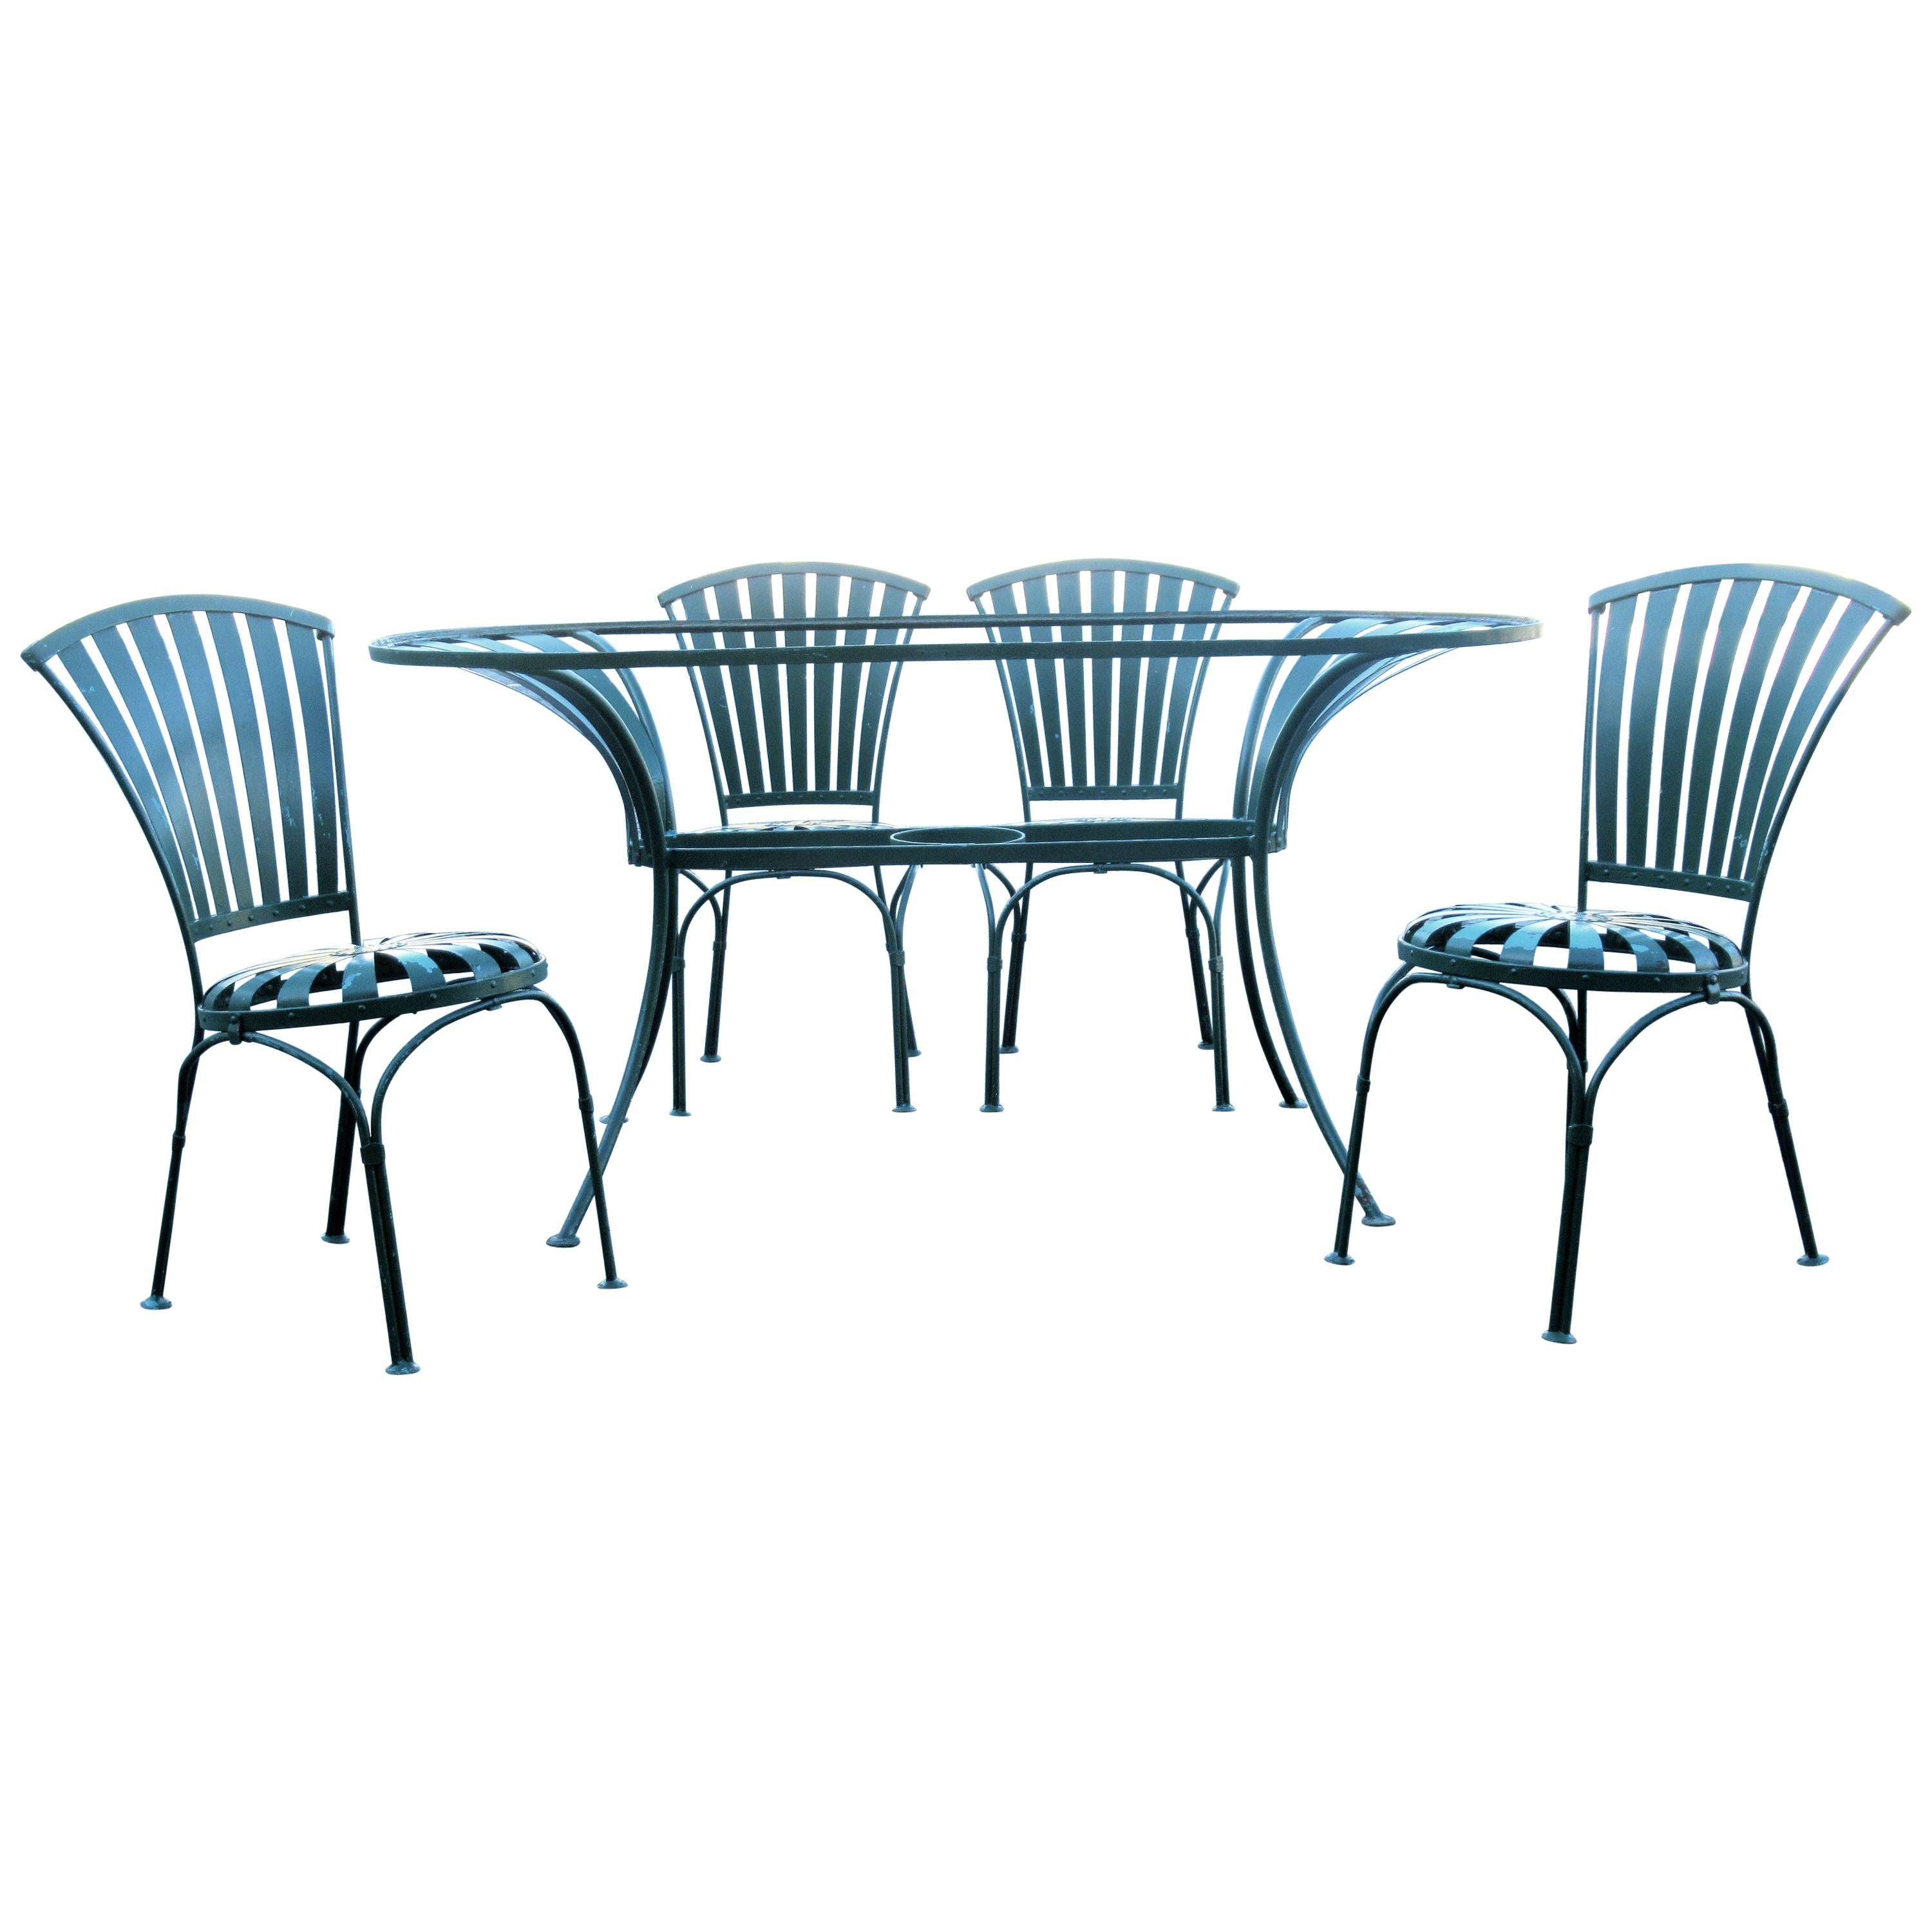  Spring Steel Garden Table and Chairs by Francois Carre